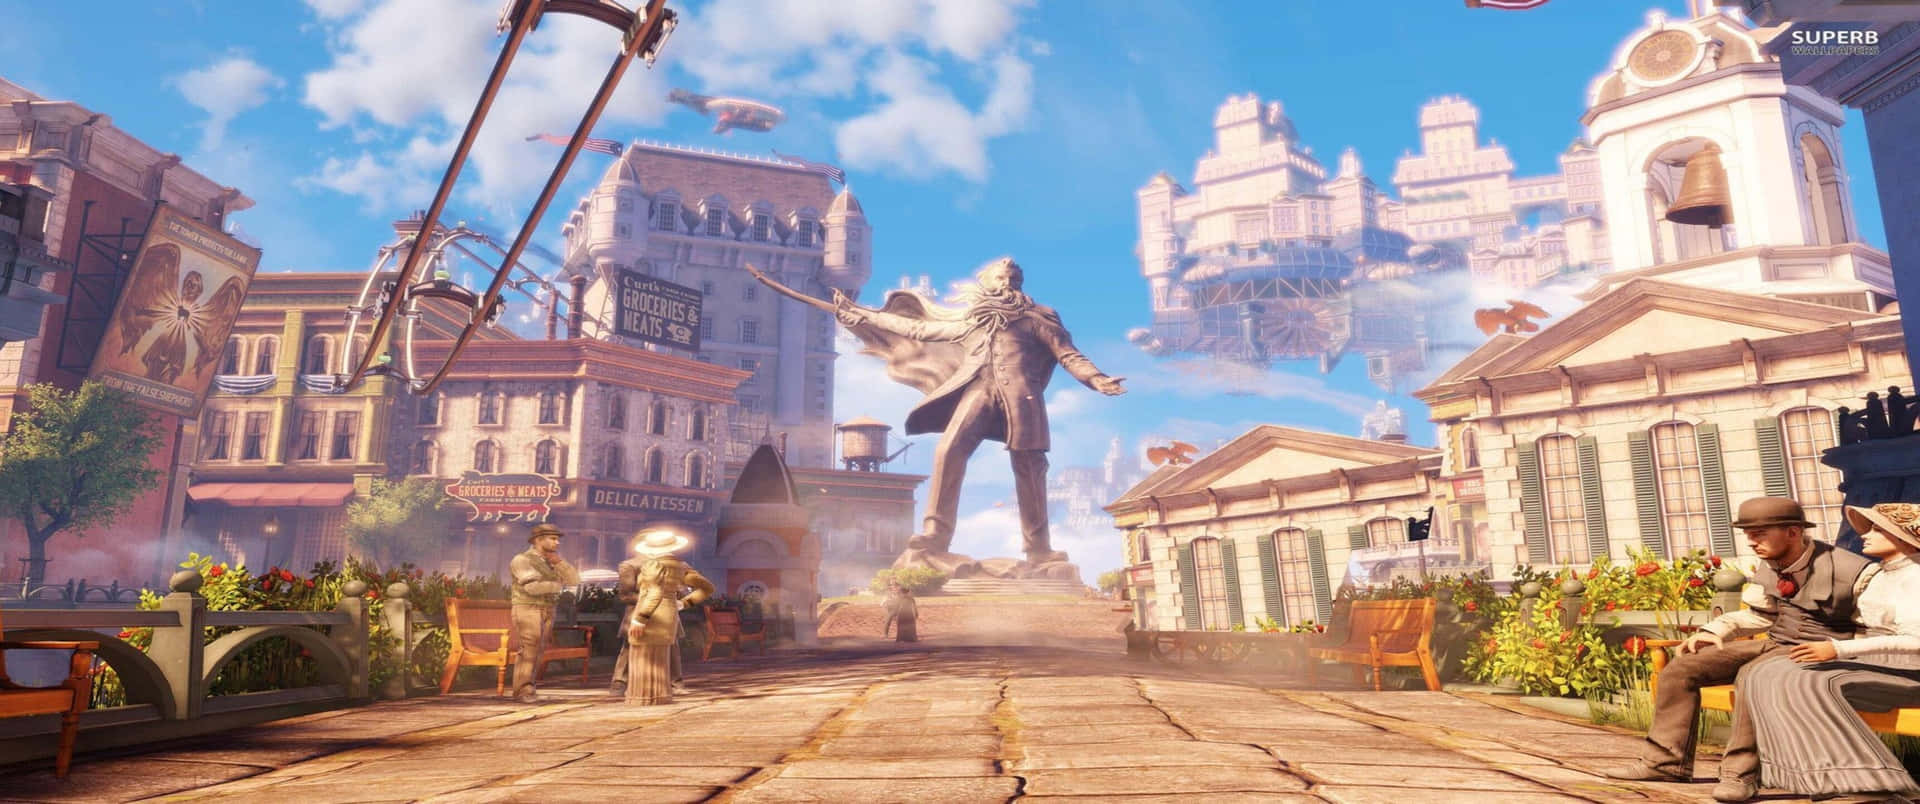 Couples On A Bench 3440x1440p Bioshock Infinite Background